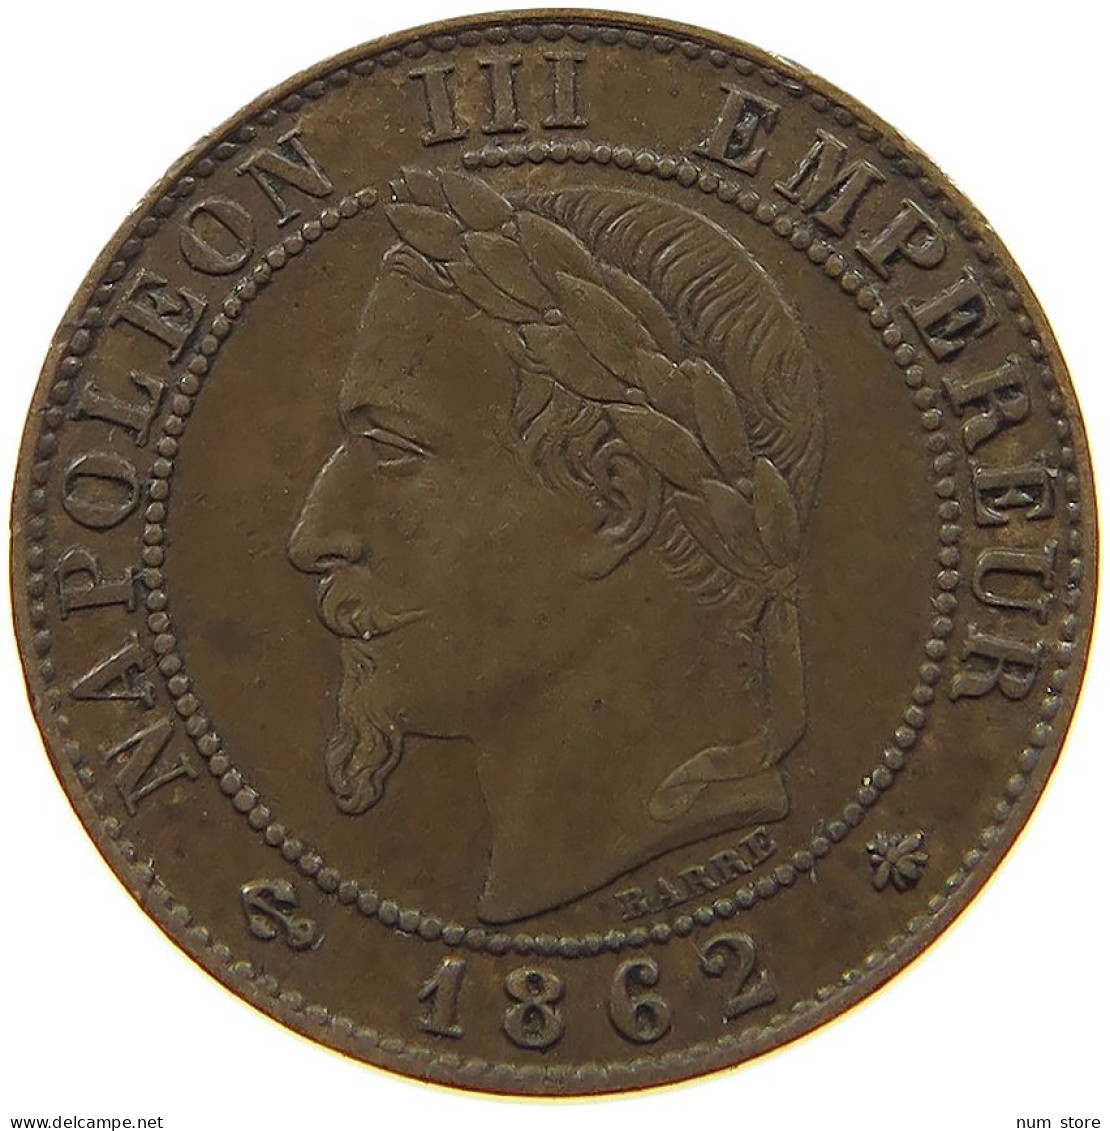 FRANCE CENTIME 1862 A Napoleon III. (1852-1870) #a015 0181 - 1 Centime